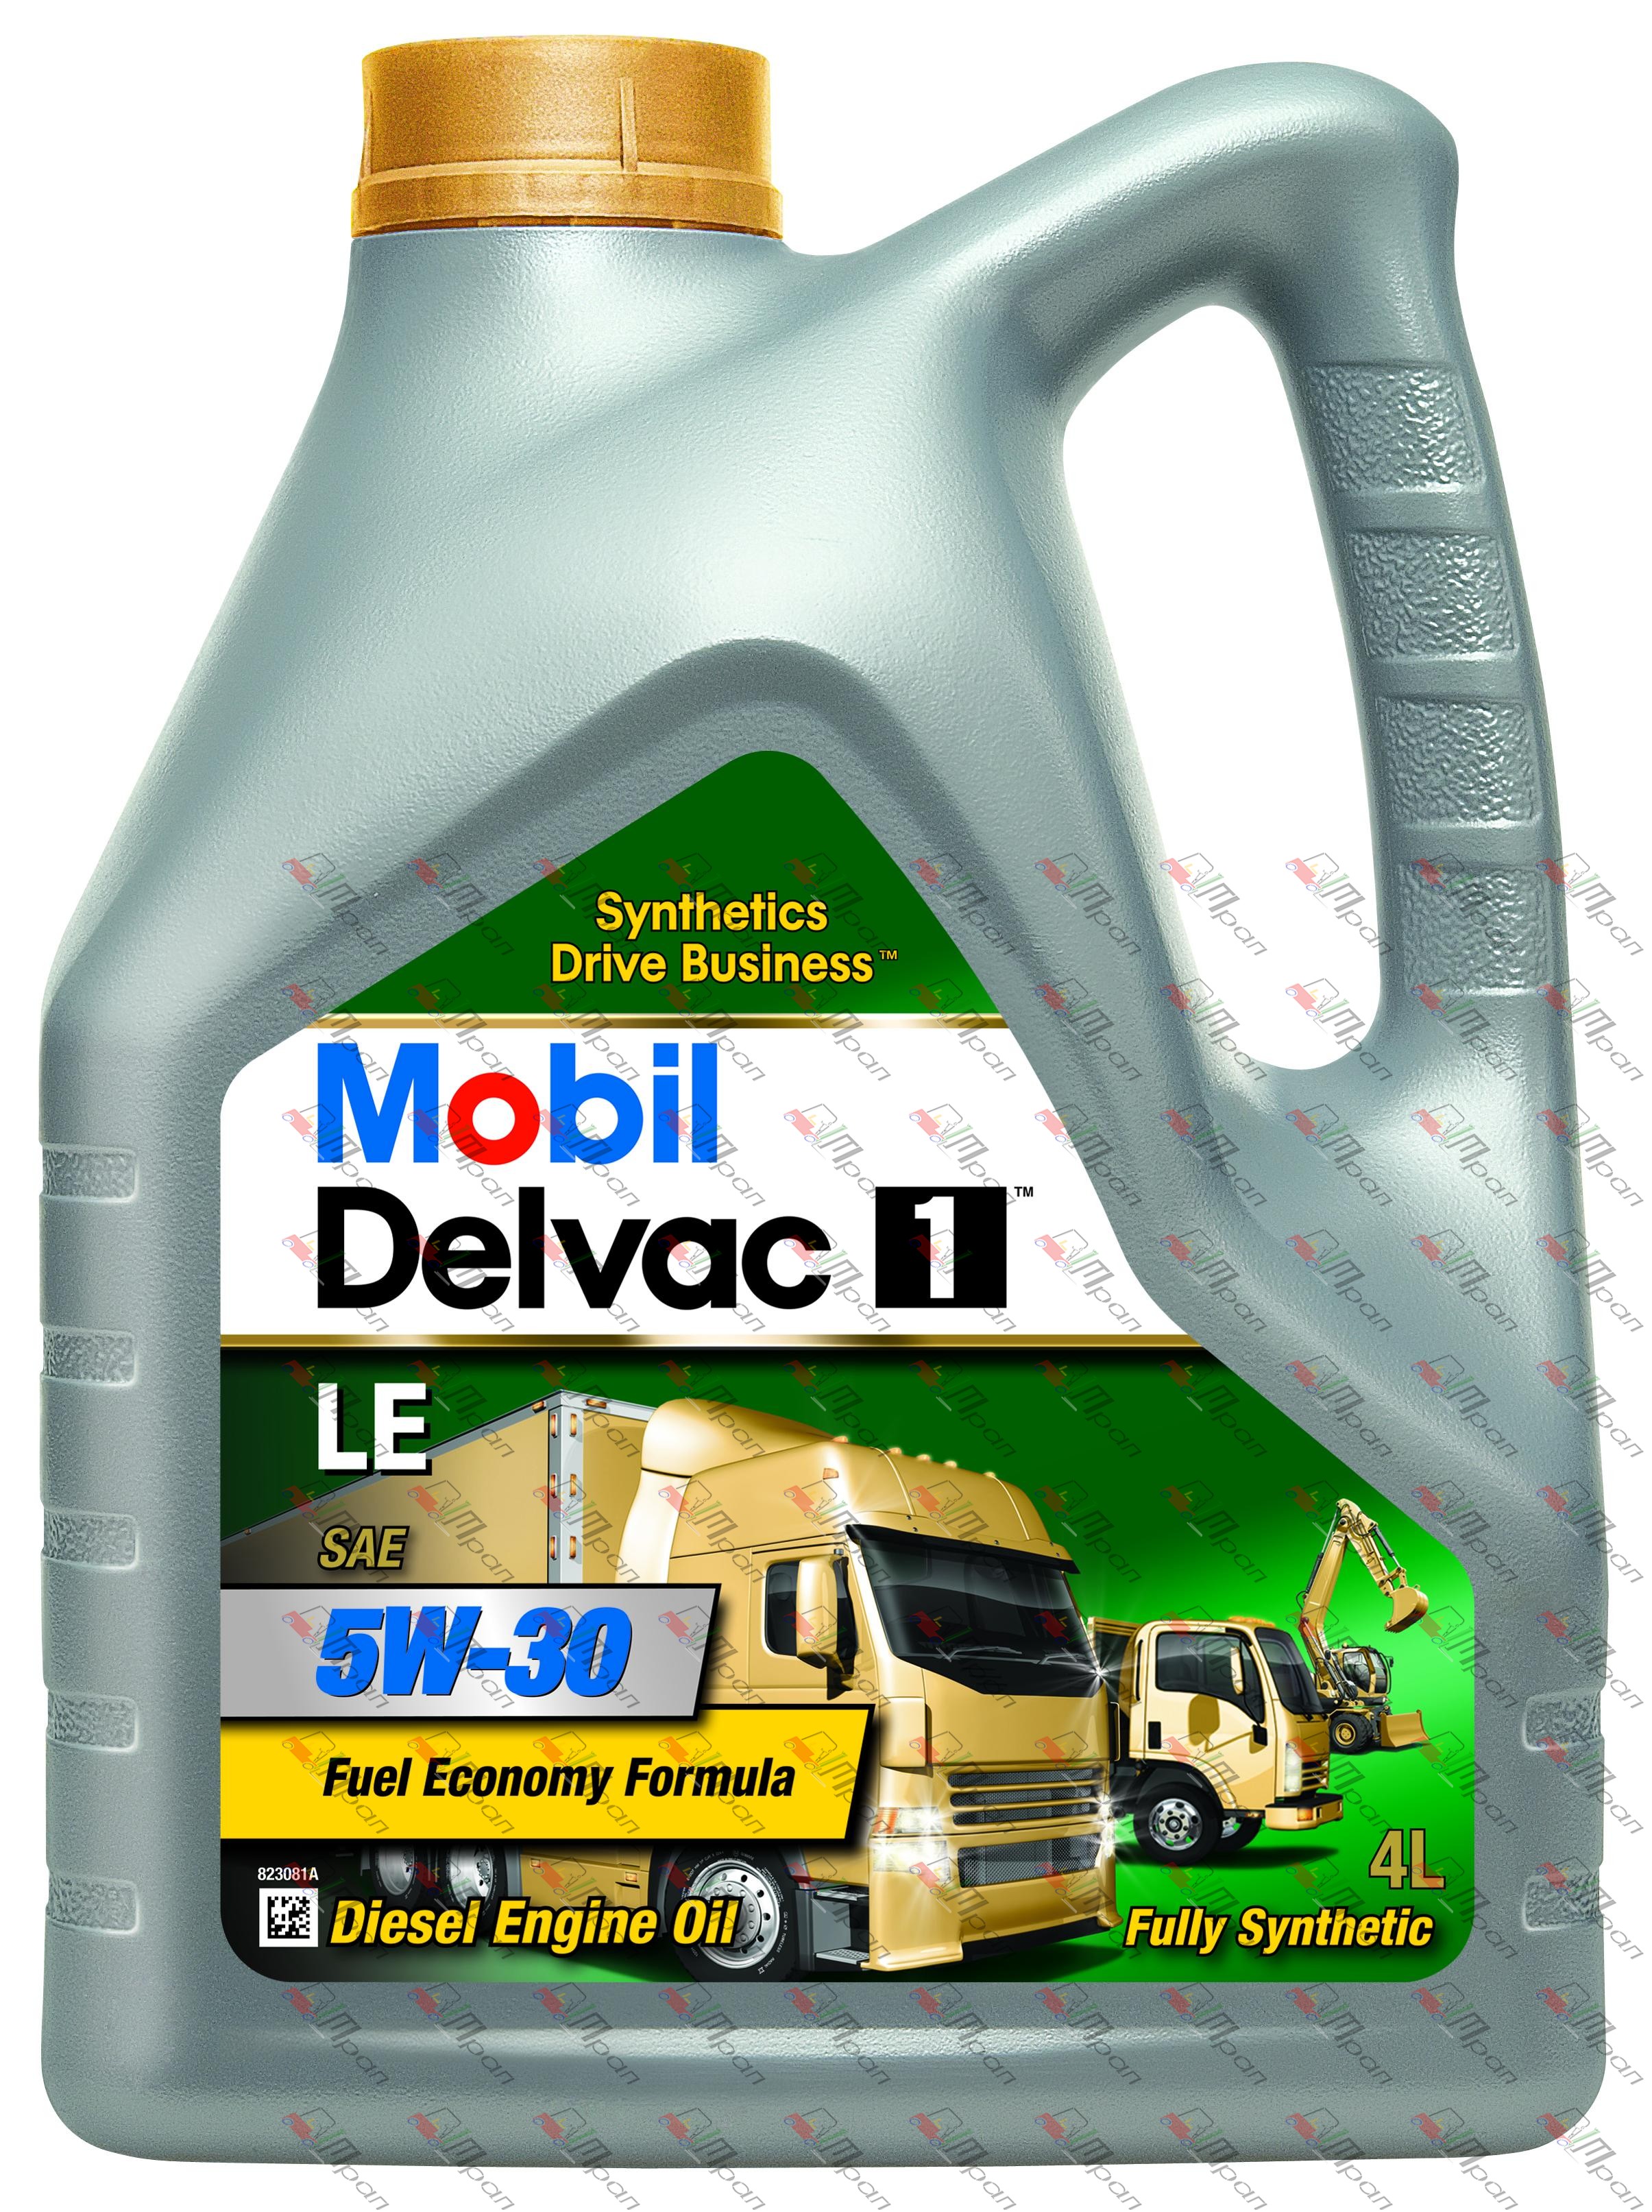 Mobil Масло моторное Mobil Delvac 1 LE 5w30 4л